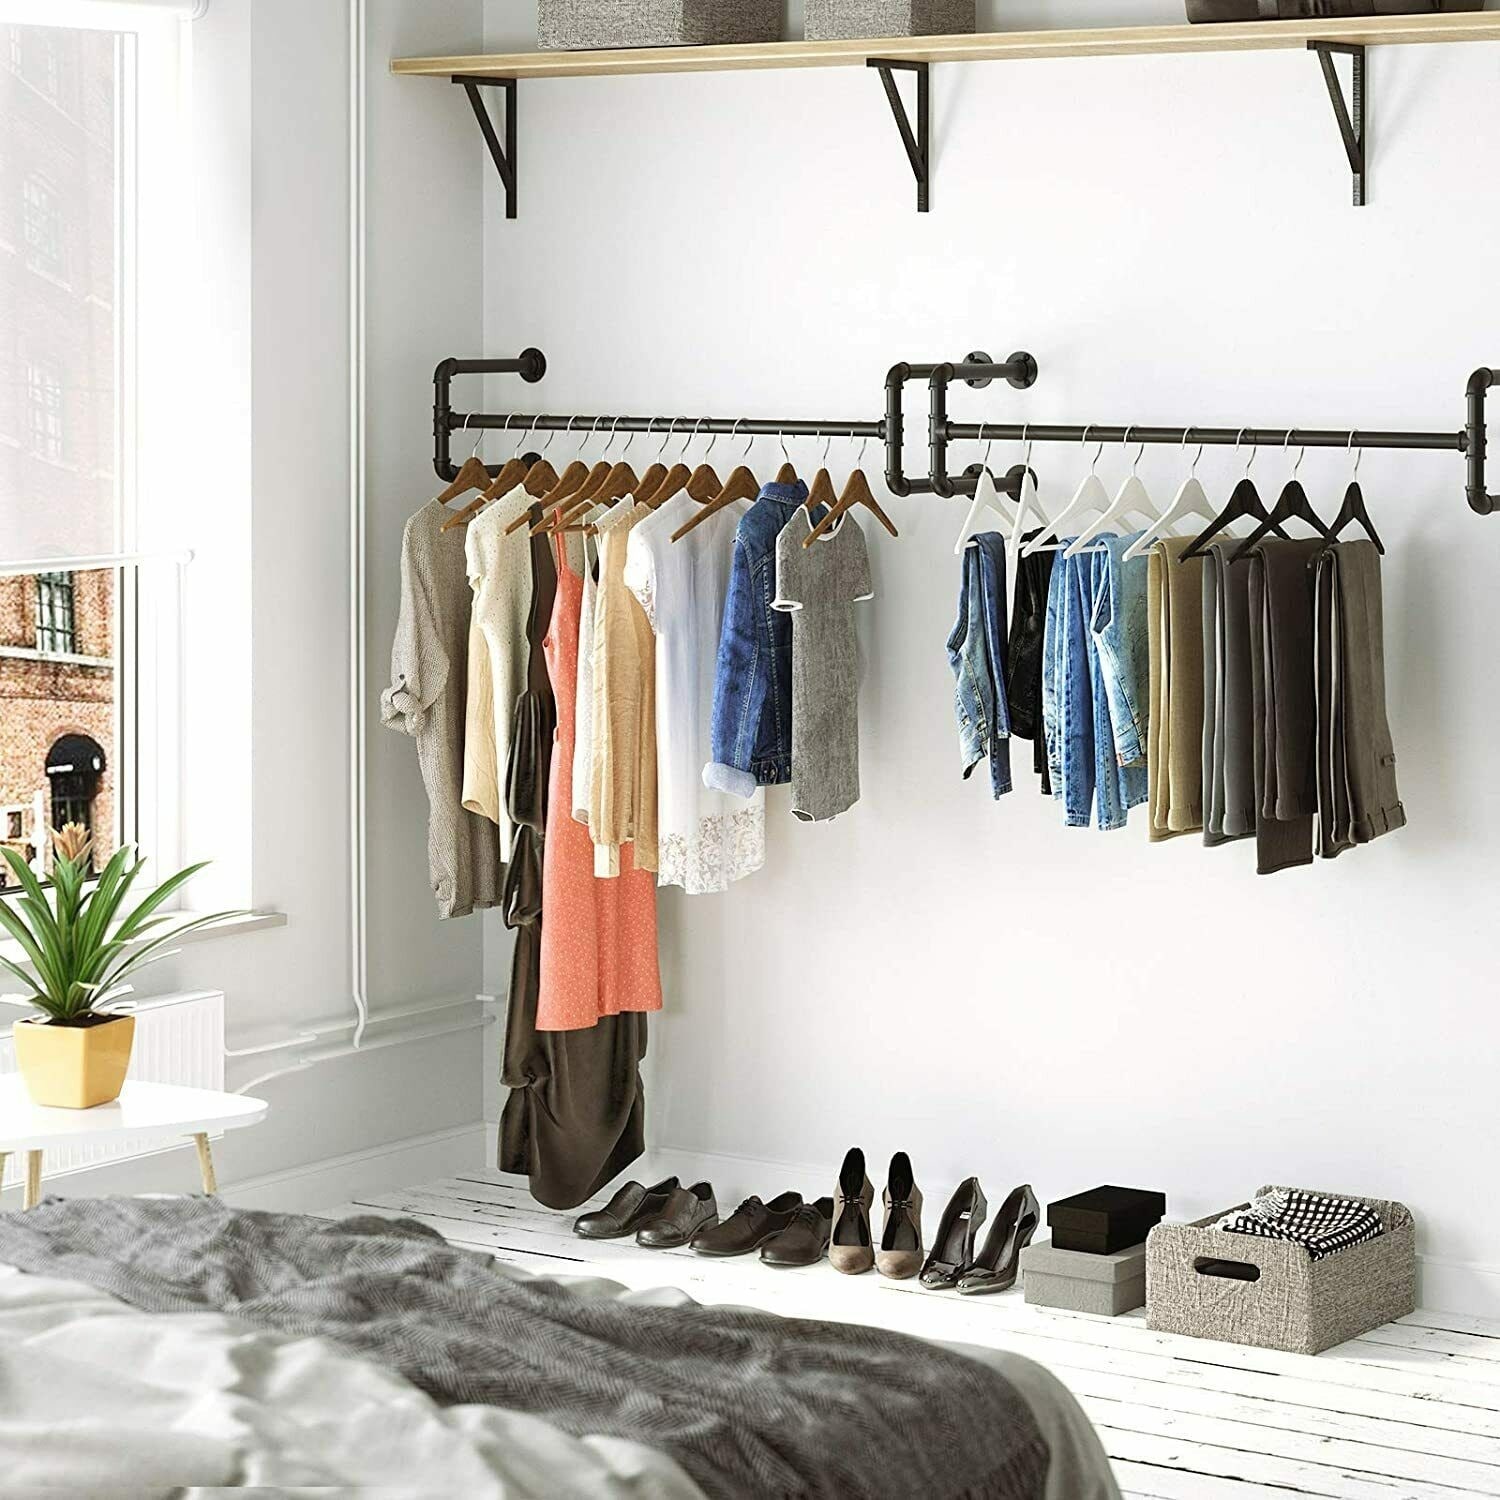 Hanging Clothes Ideas | tunersread.com